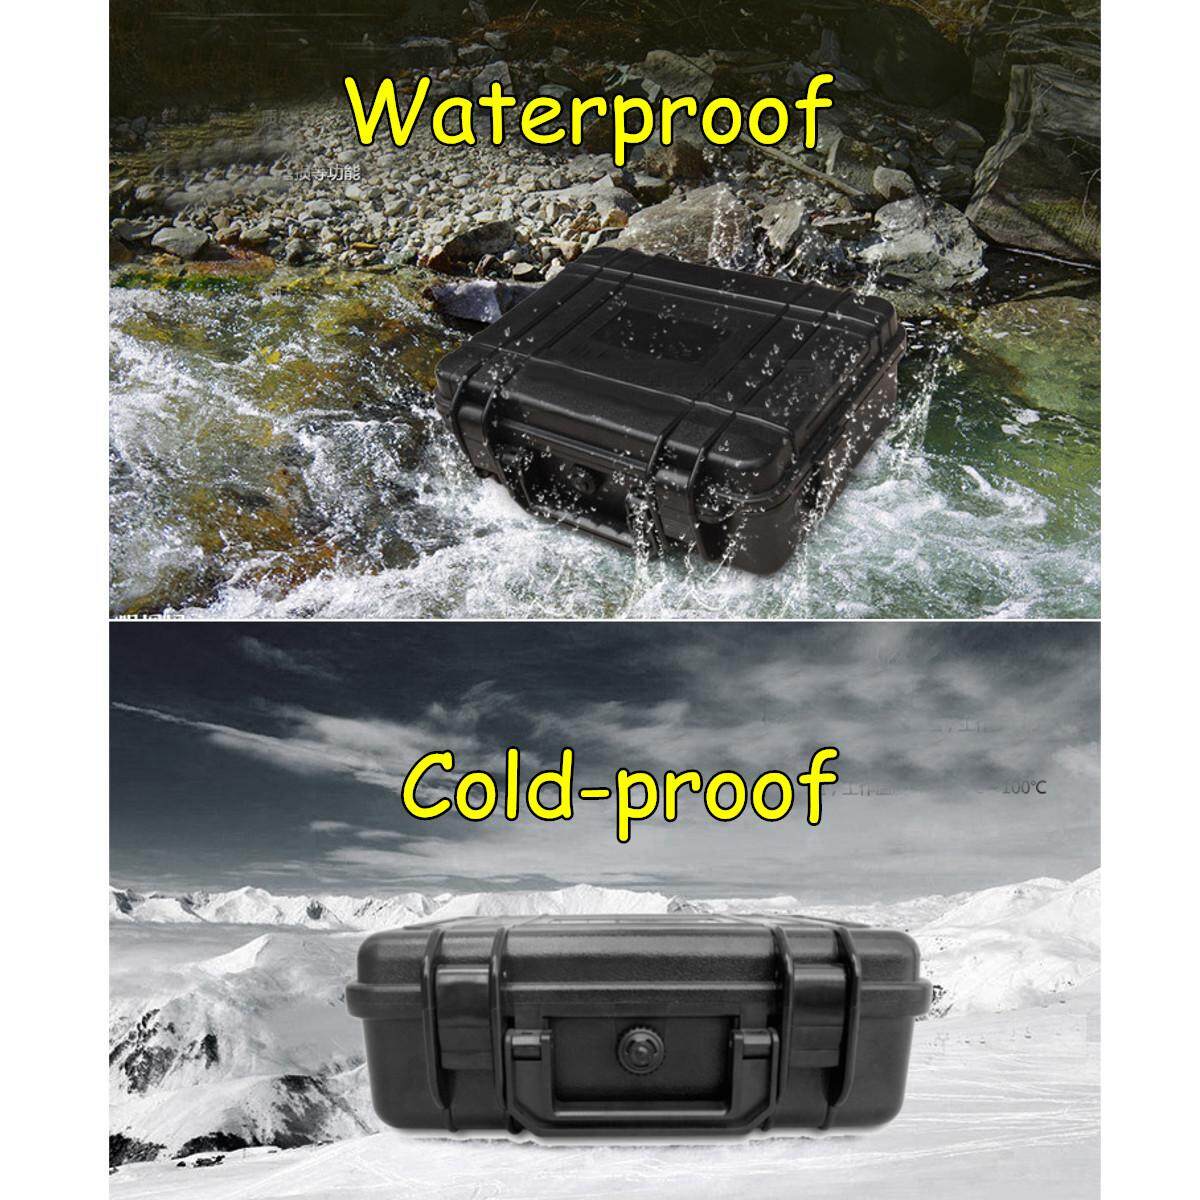 3 Sizes Waterproof Hard Carry Case Plastic Equipment Protective Storage Boxes # 27*24.6*12.4cm